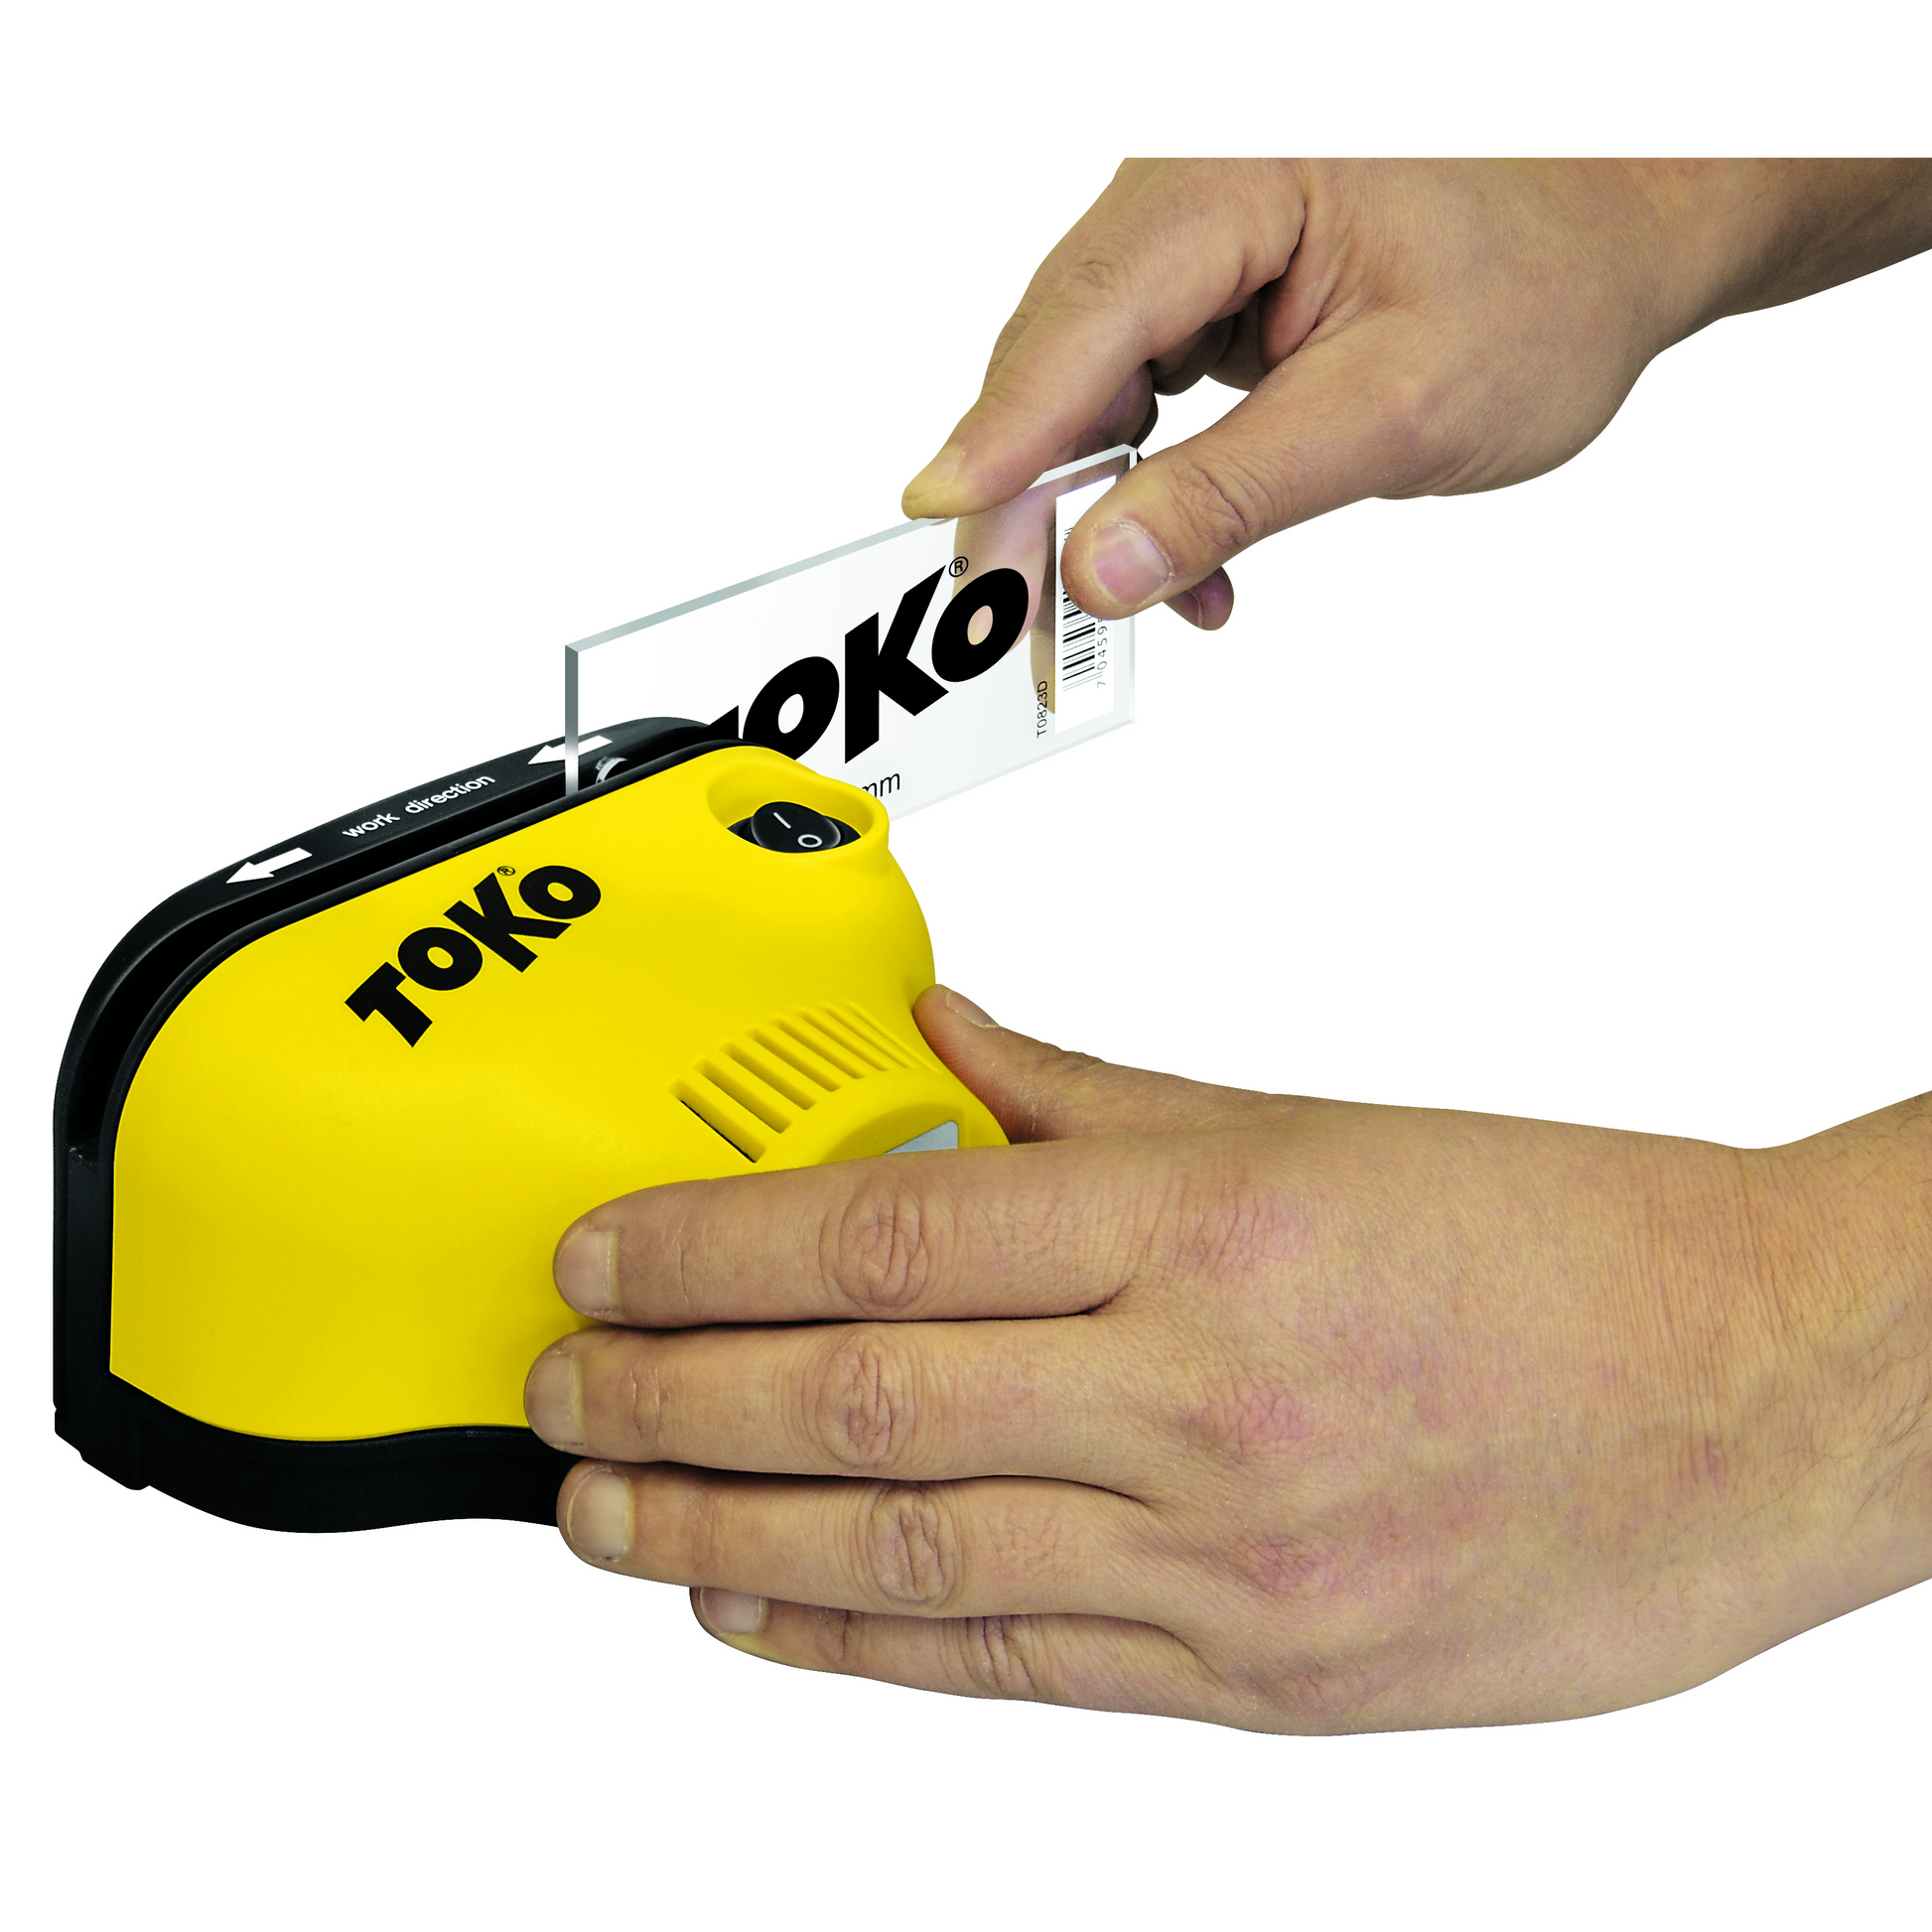 A product picture of the Toko Scraper Sharpener World Cup Pro 110V